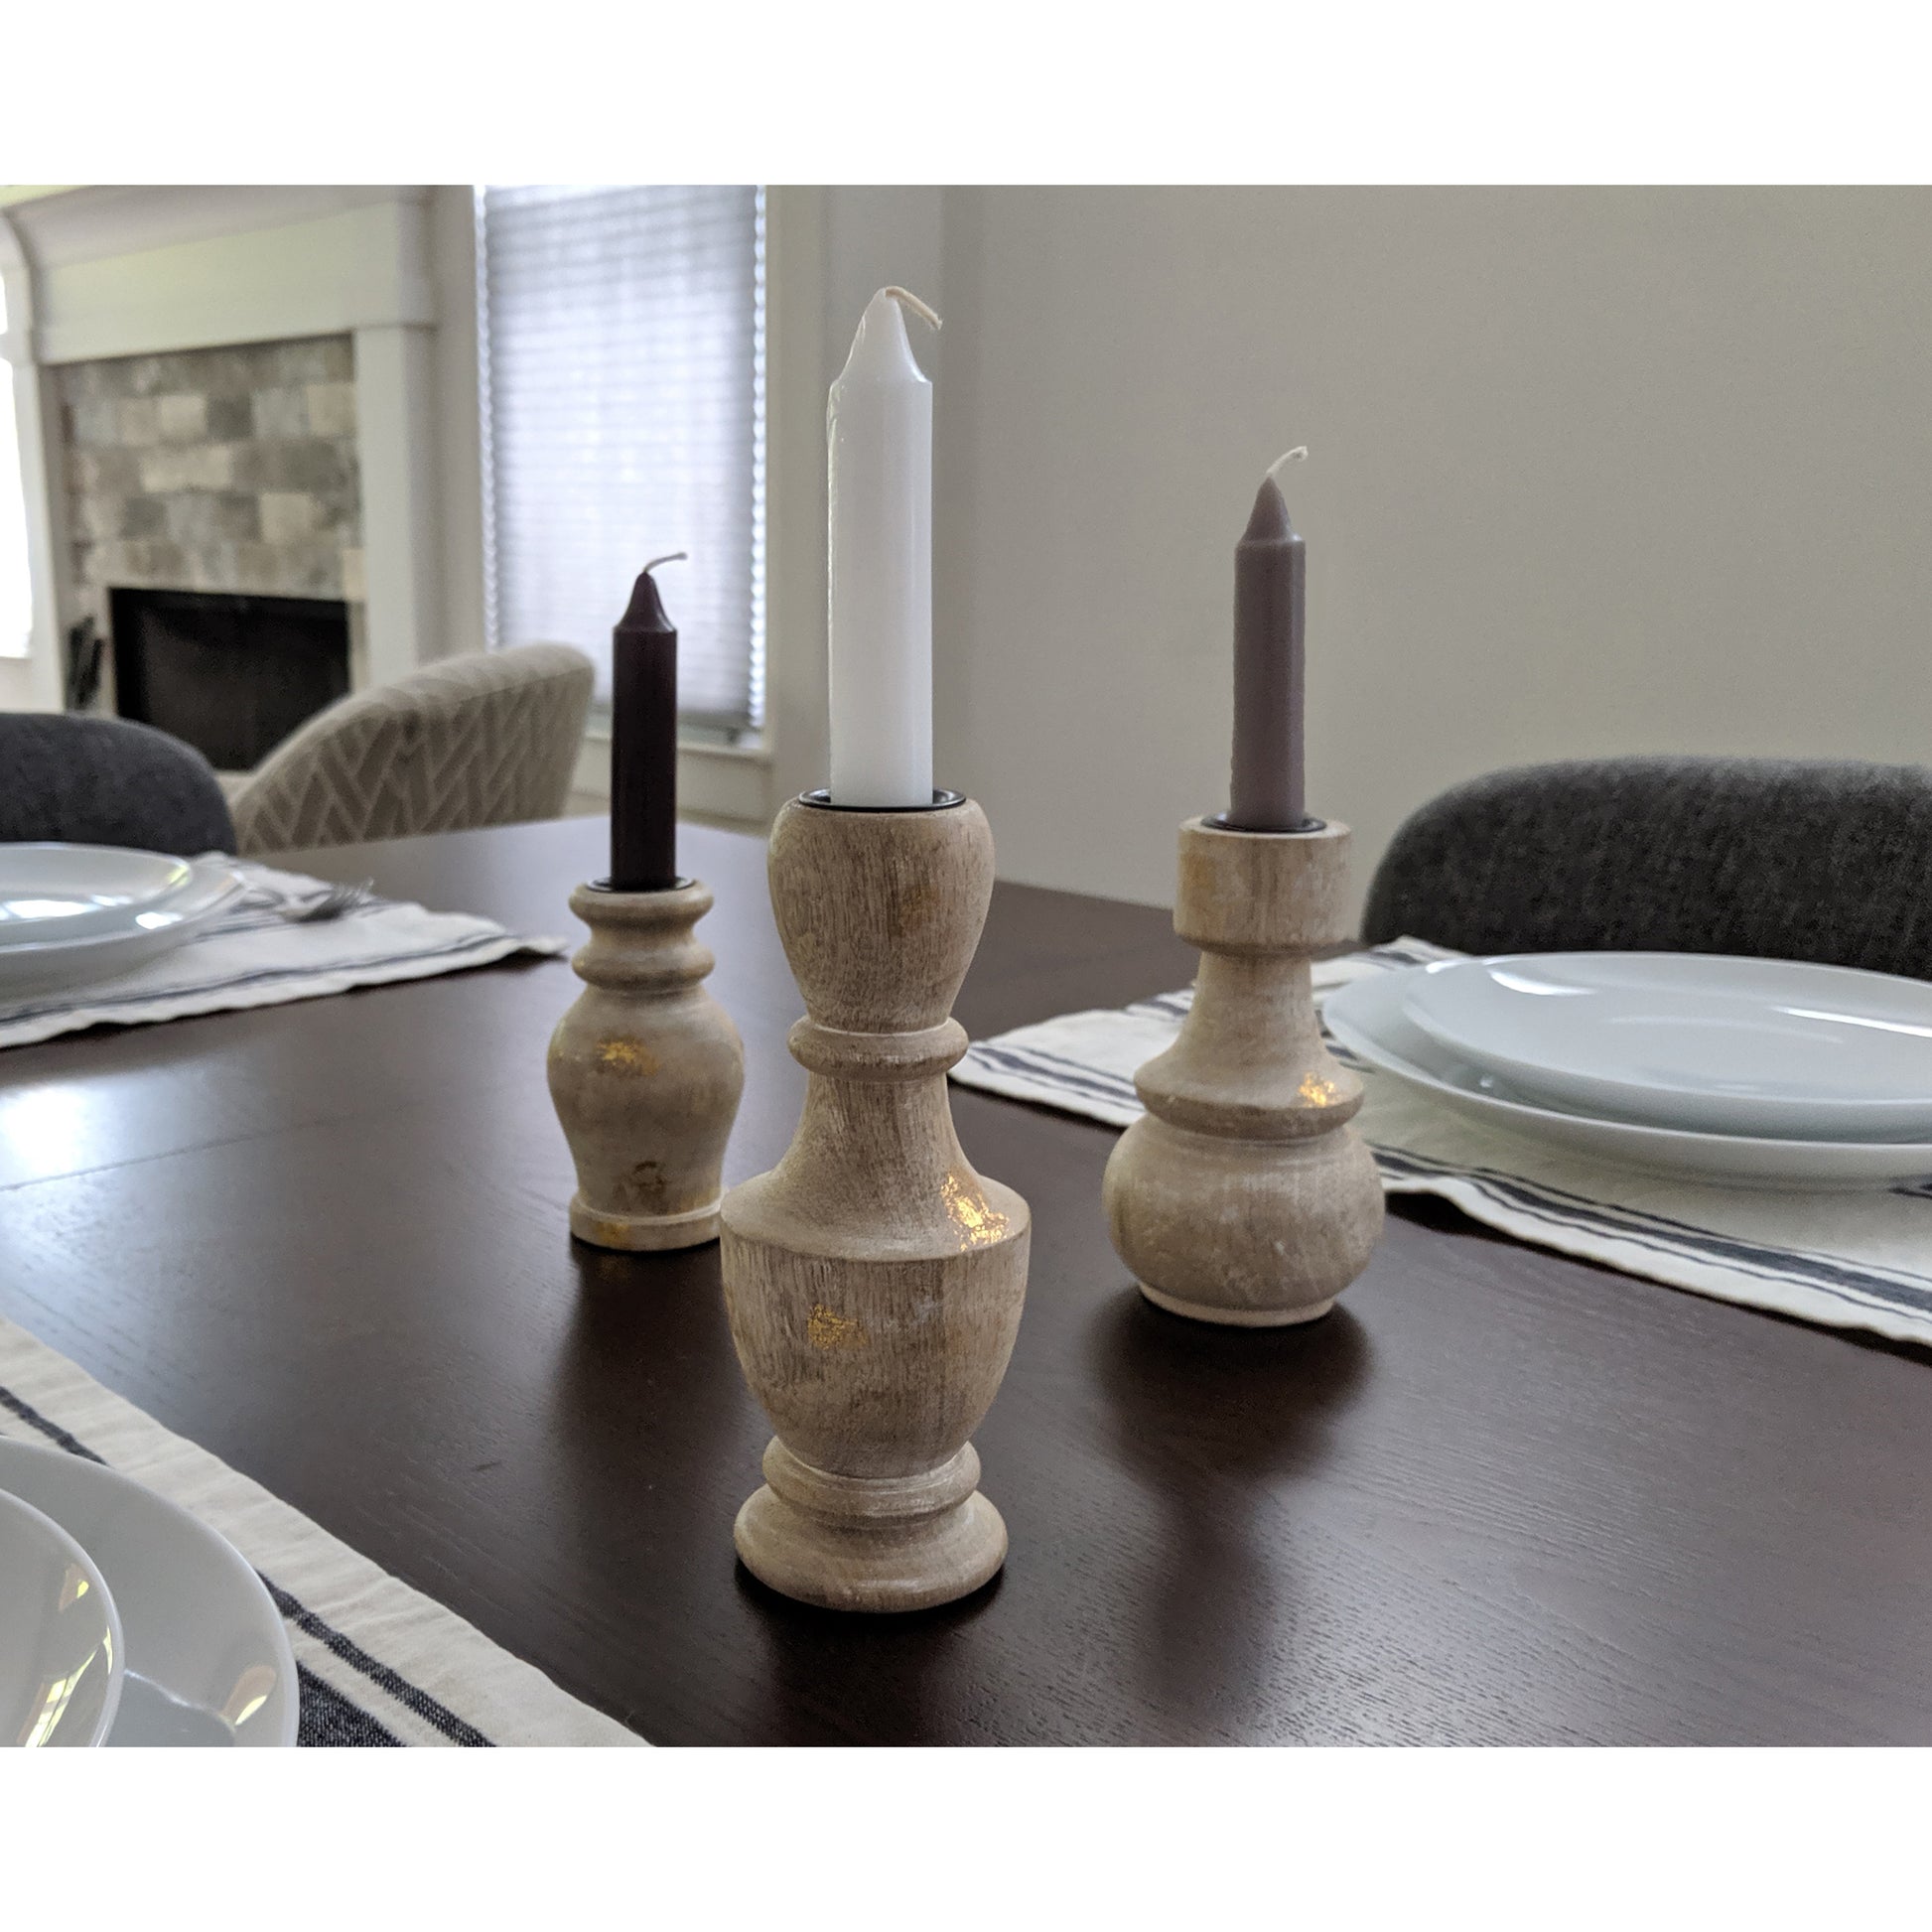 Image, white, grey and black candles in wooden candle holders, displayed on dining table.